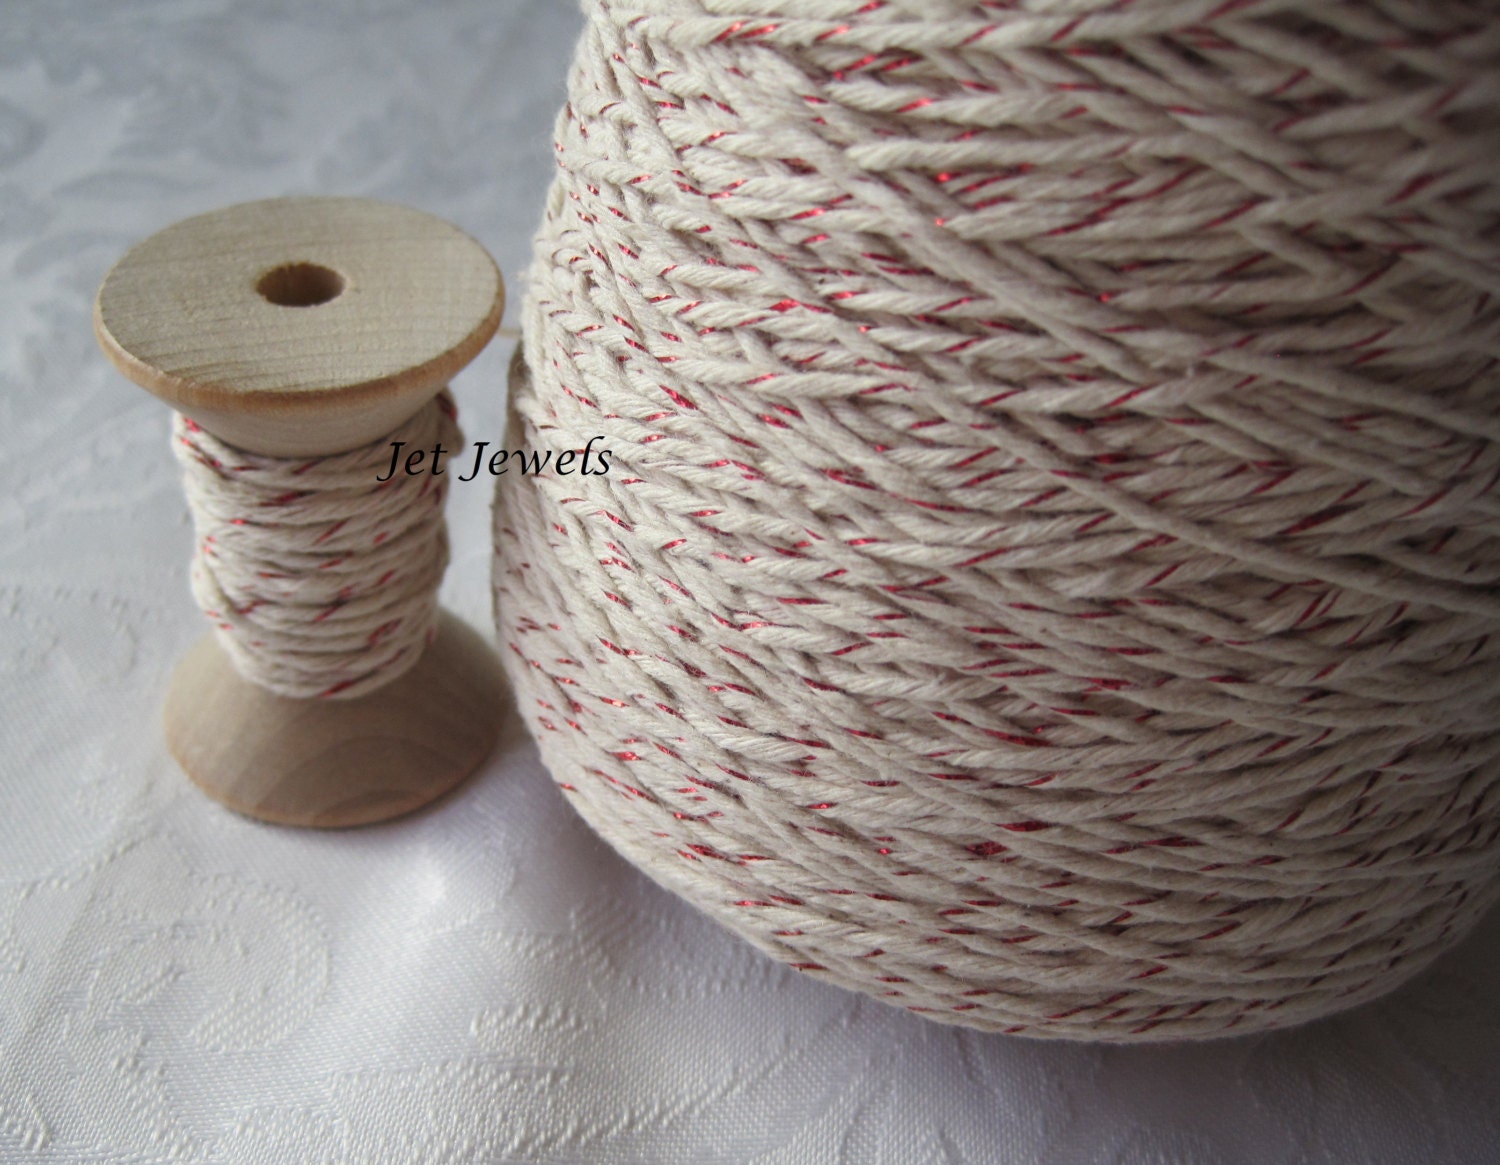 50 Yards Cotton Twine, Cotton String, Bakers Twine, Colored String, Box  Bakery String, Gift Wrapping, Rustic Gift Wrap, Choose Color 